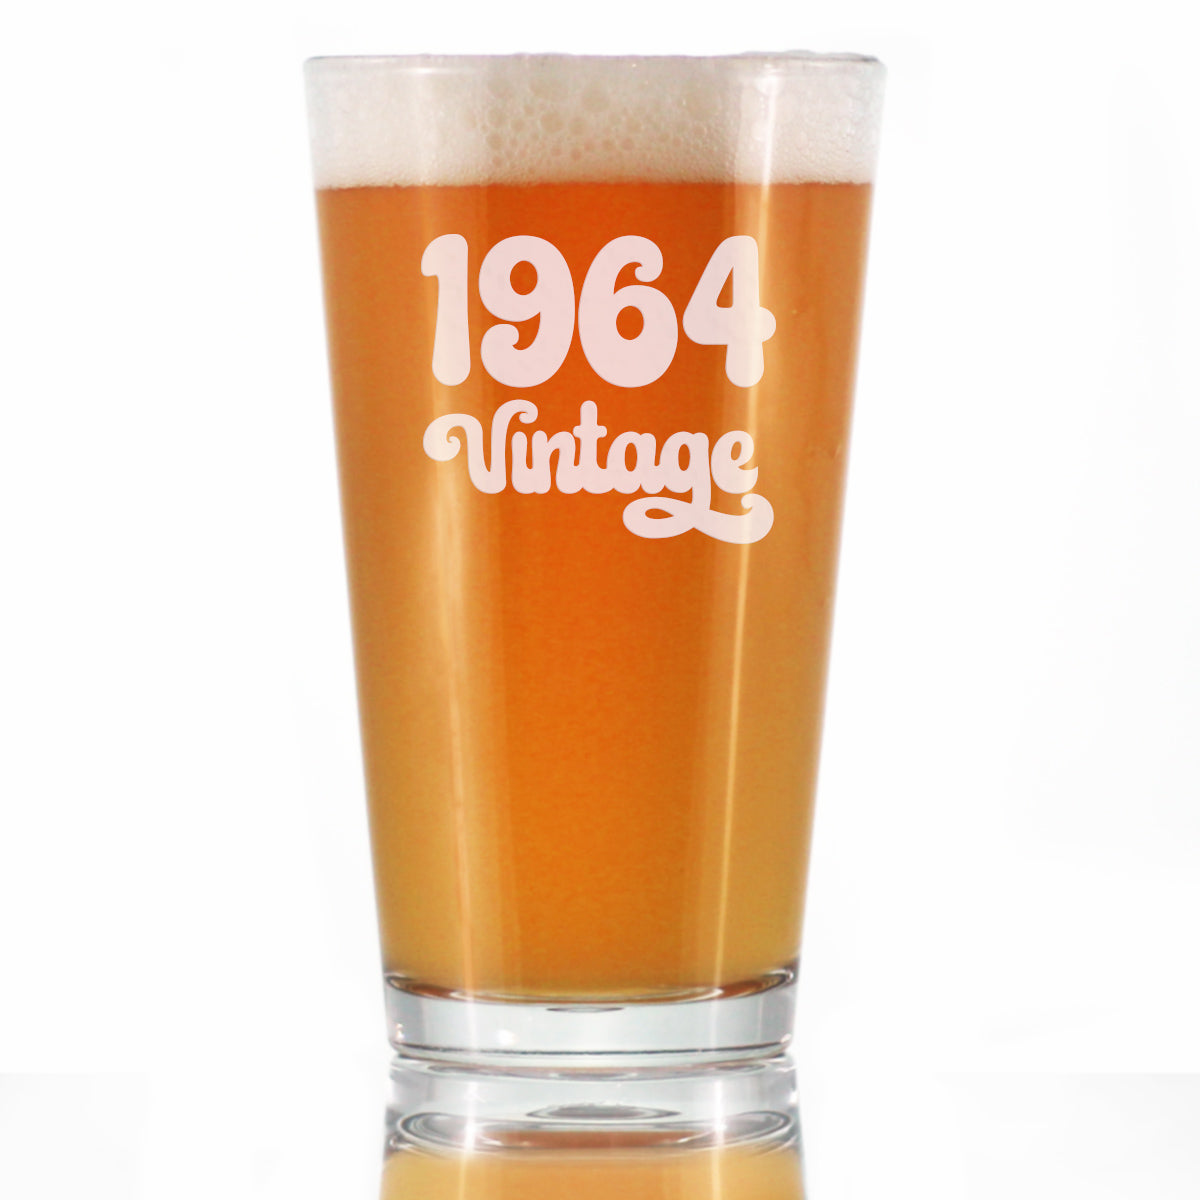 Vintage 1964 - Pint Glass for Beer - 60th Birthday Gifts for Men or Women Turning 60 - Fun Bday Party Decor - 16 oz